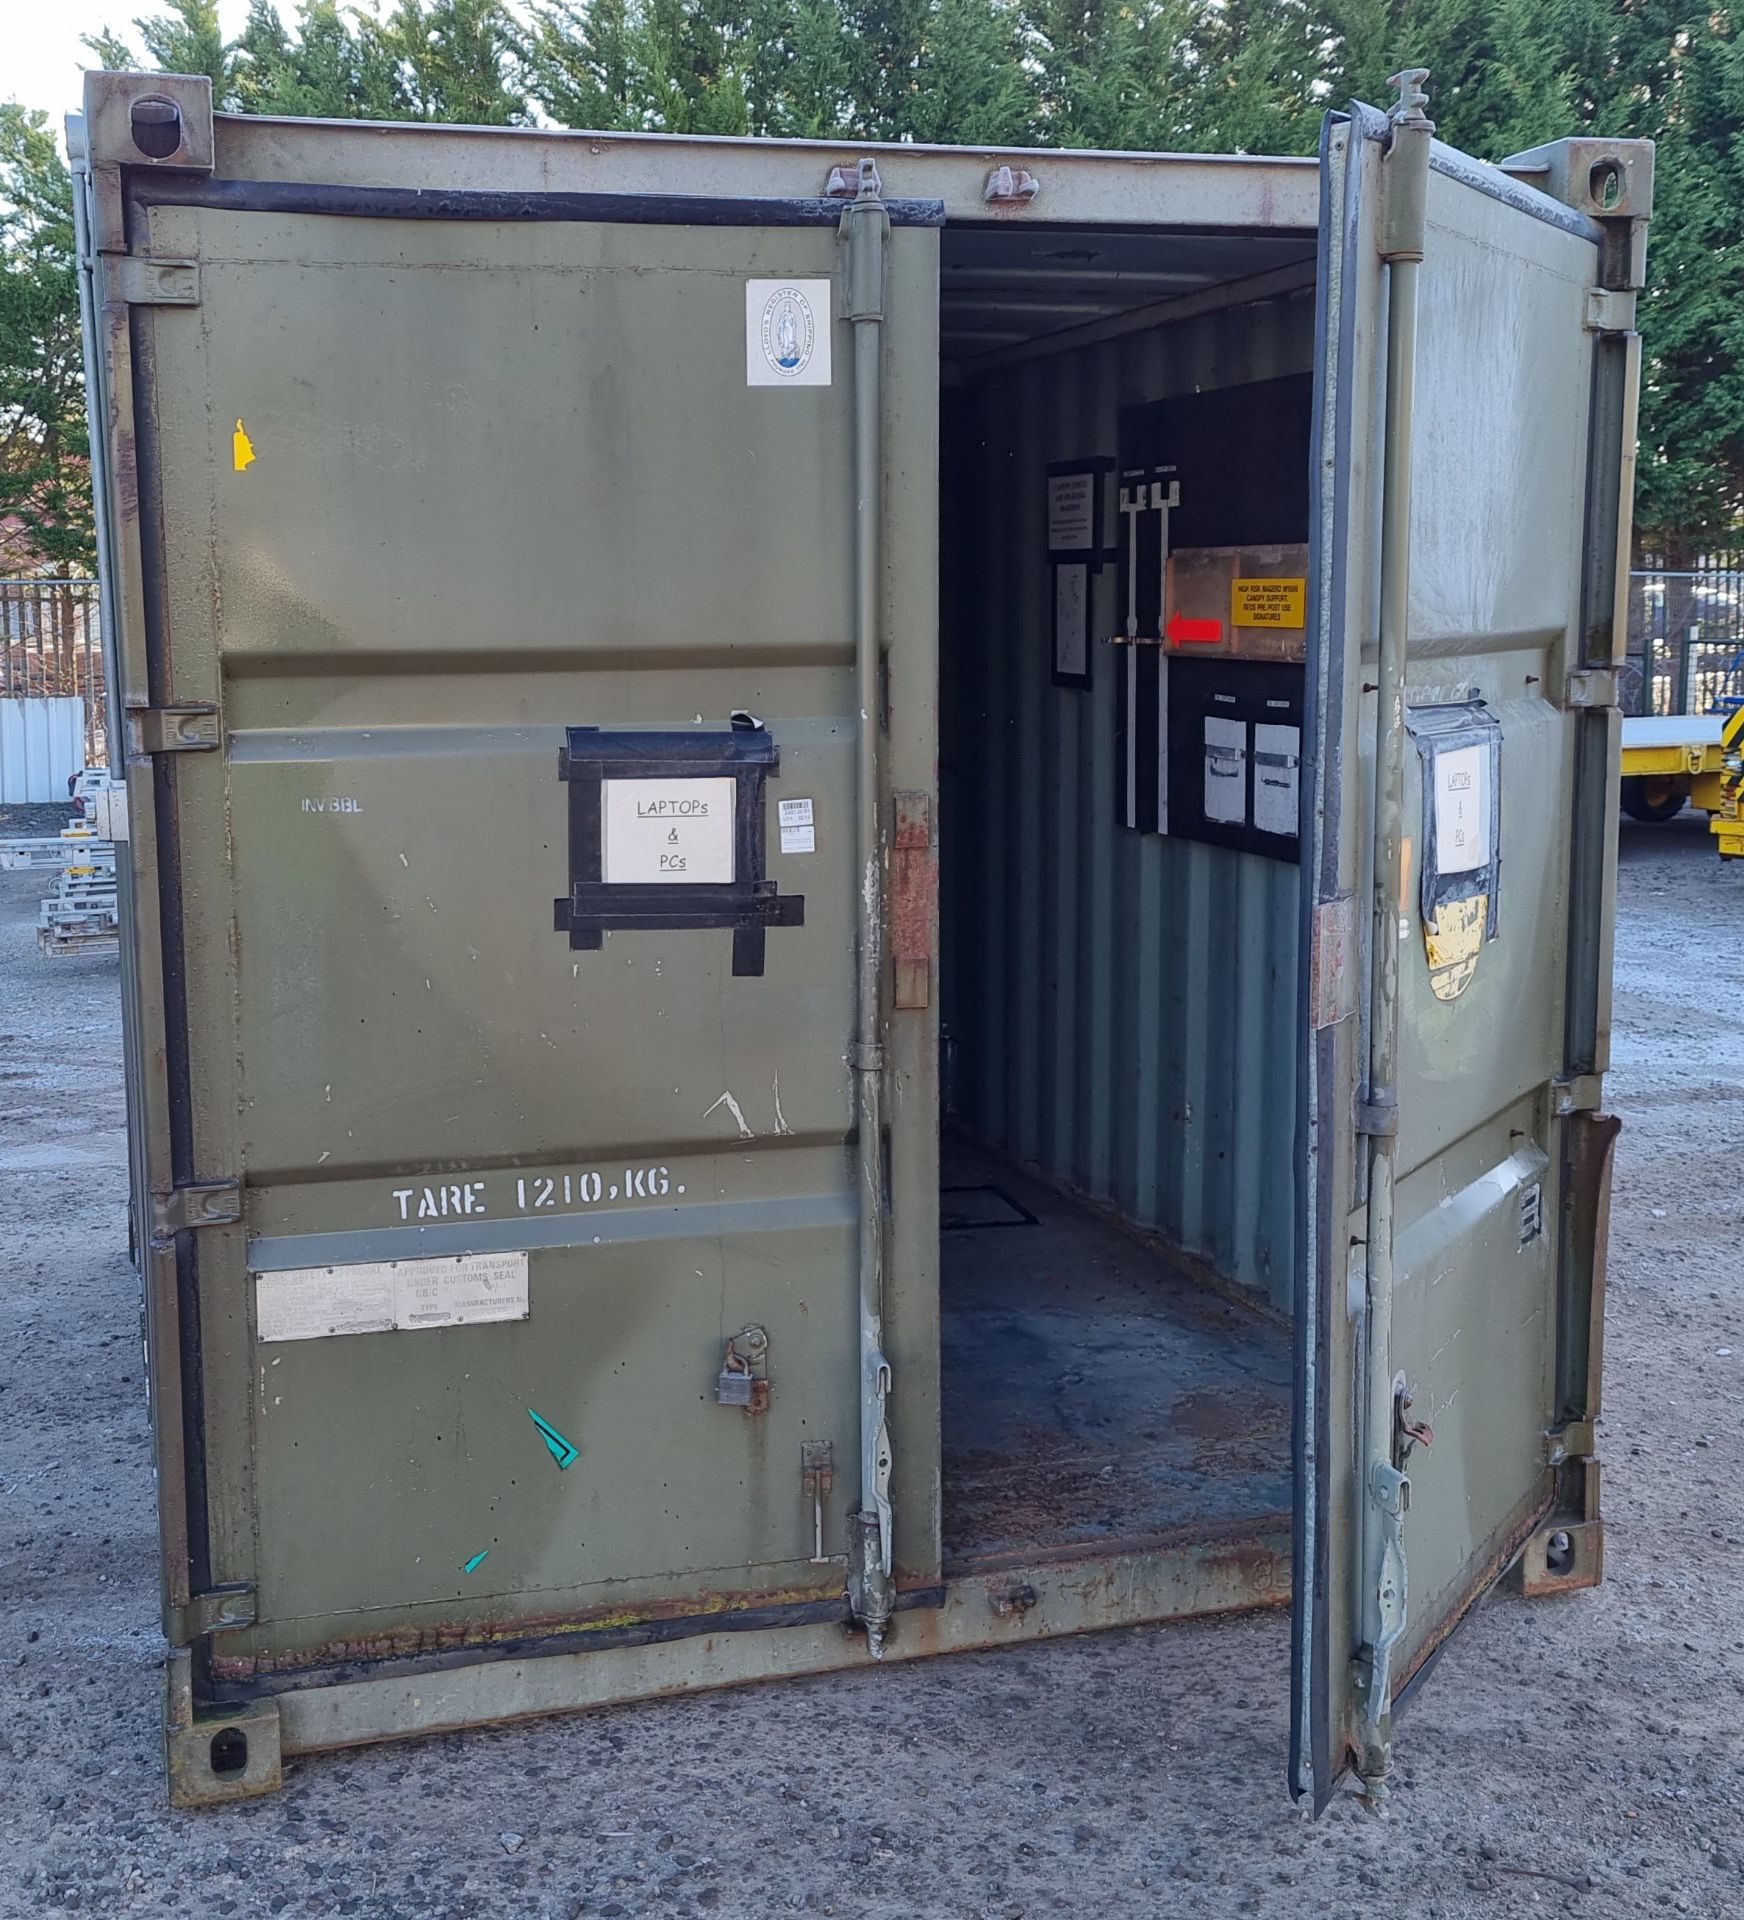 10 Foot shipping container - with external power hook up - see pictures for condition